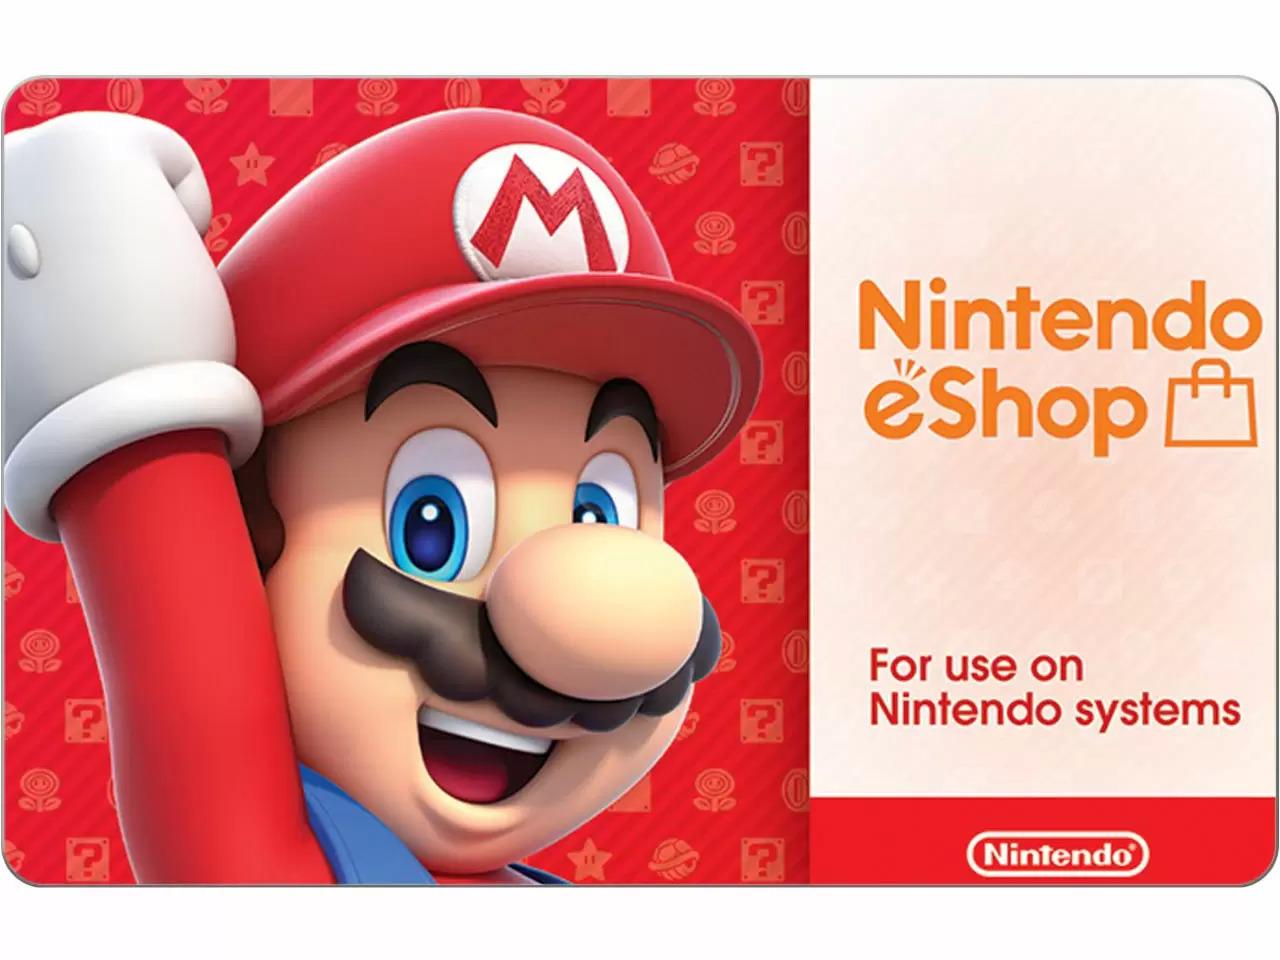 Nintendo eShop Discounted Gift Card for 10% Off